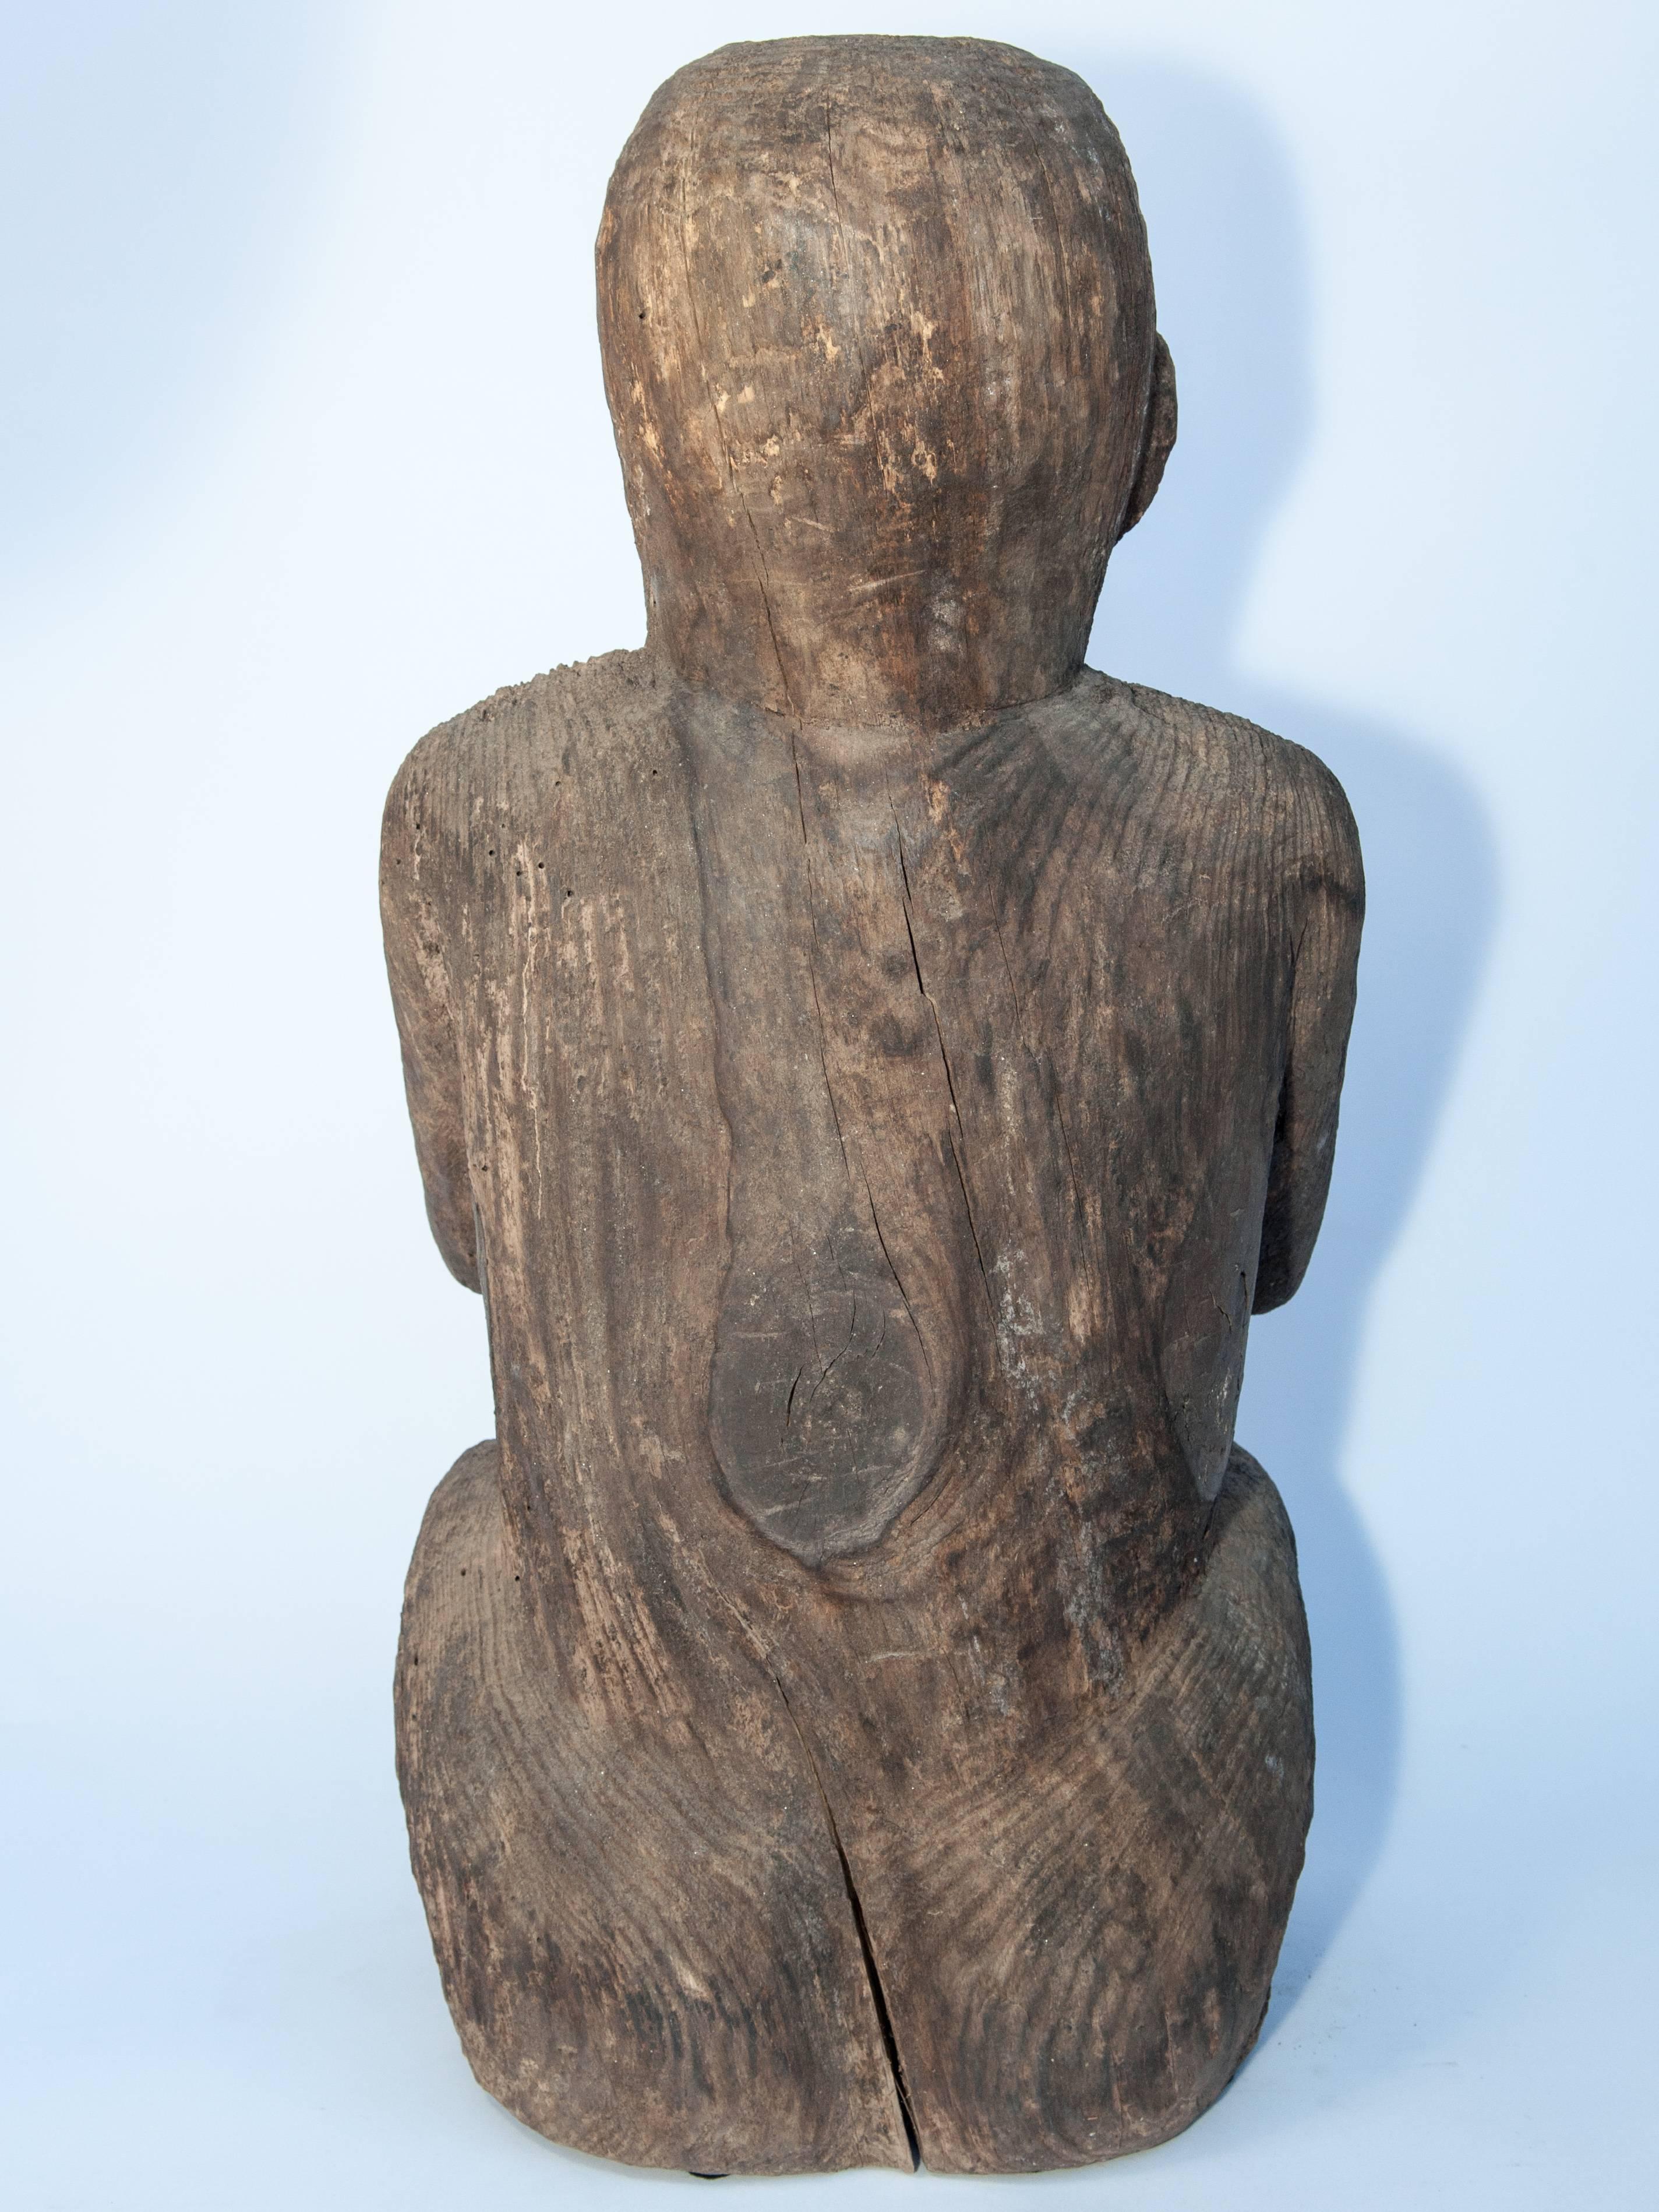 Hand-Carved Tribal Statue Shaman Figure from Accham, West Nepal, Early to Mid-20th Century